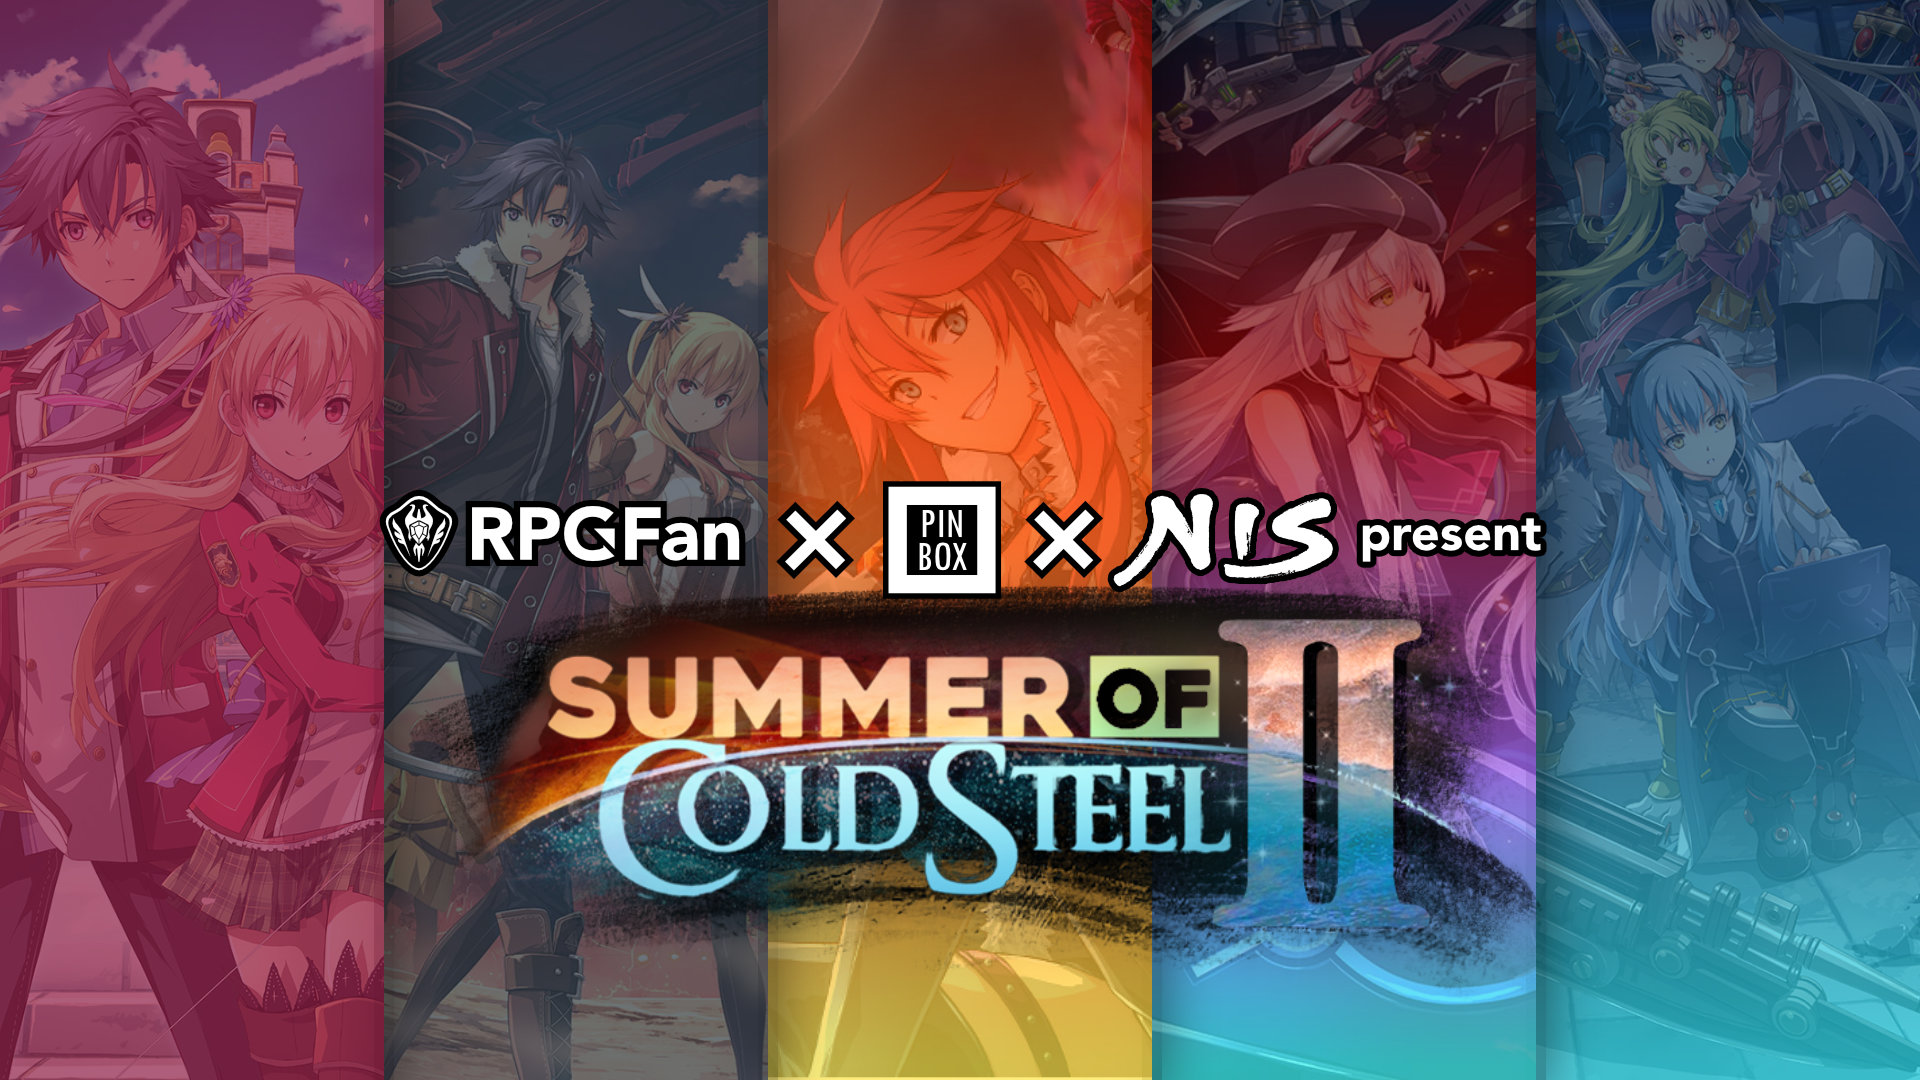 Summer of Cold Steel II with Pin Box and NIS